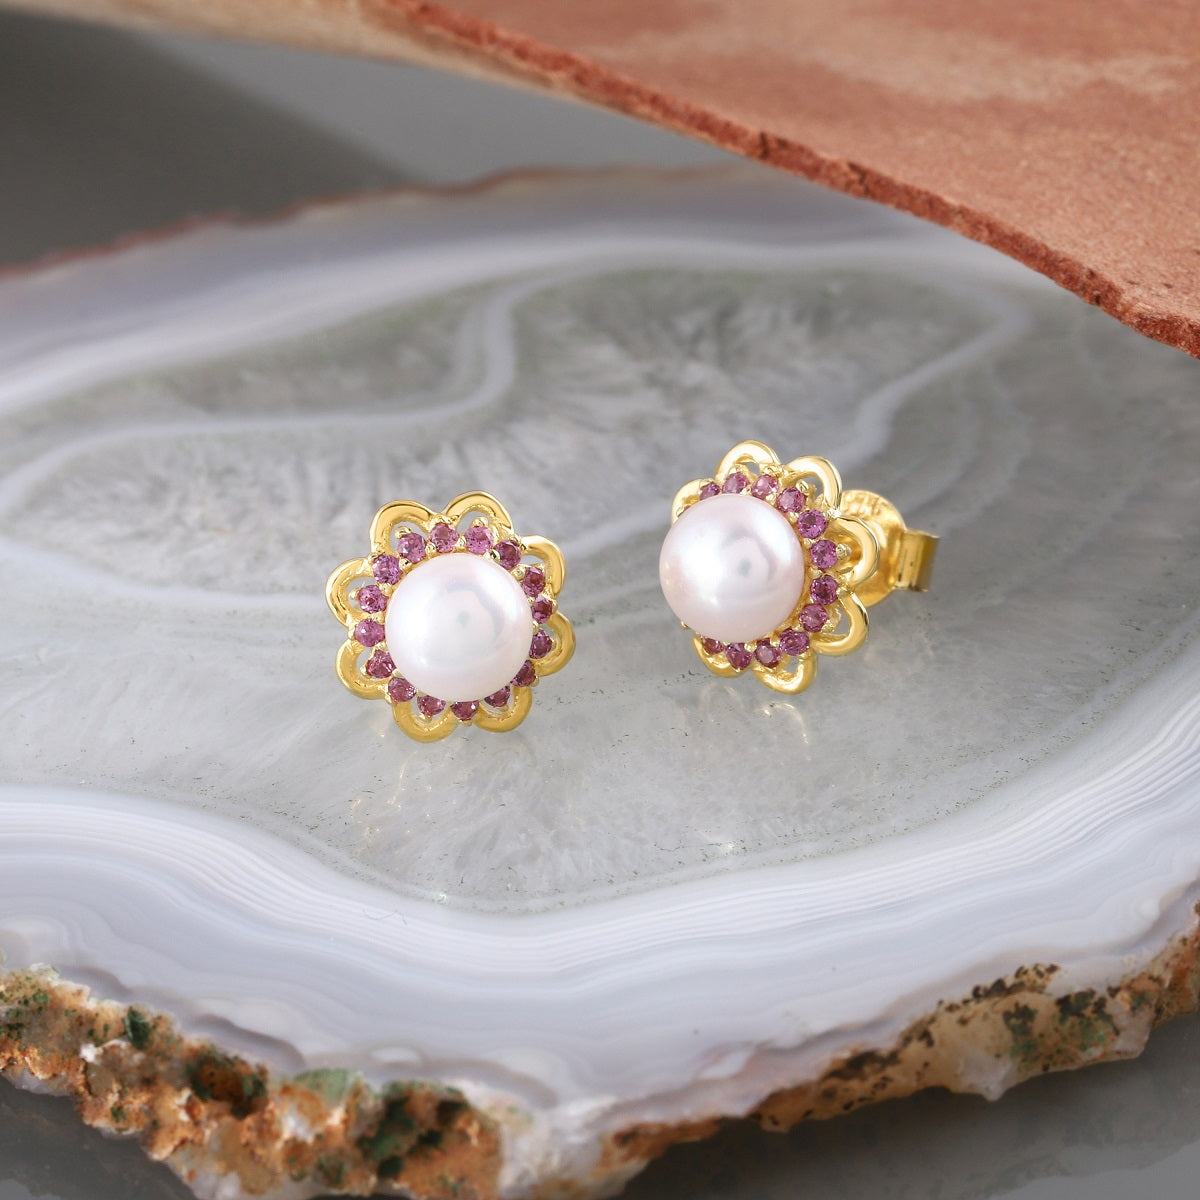 Gemstone Earrings Featuring Classic Pearls and Vibrant Rhodolites